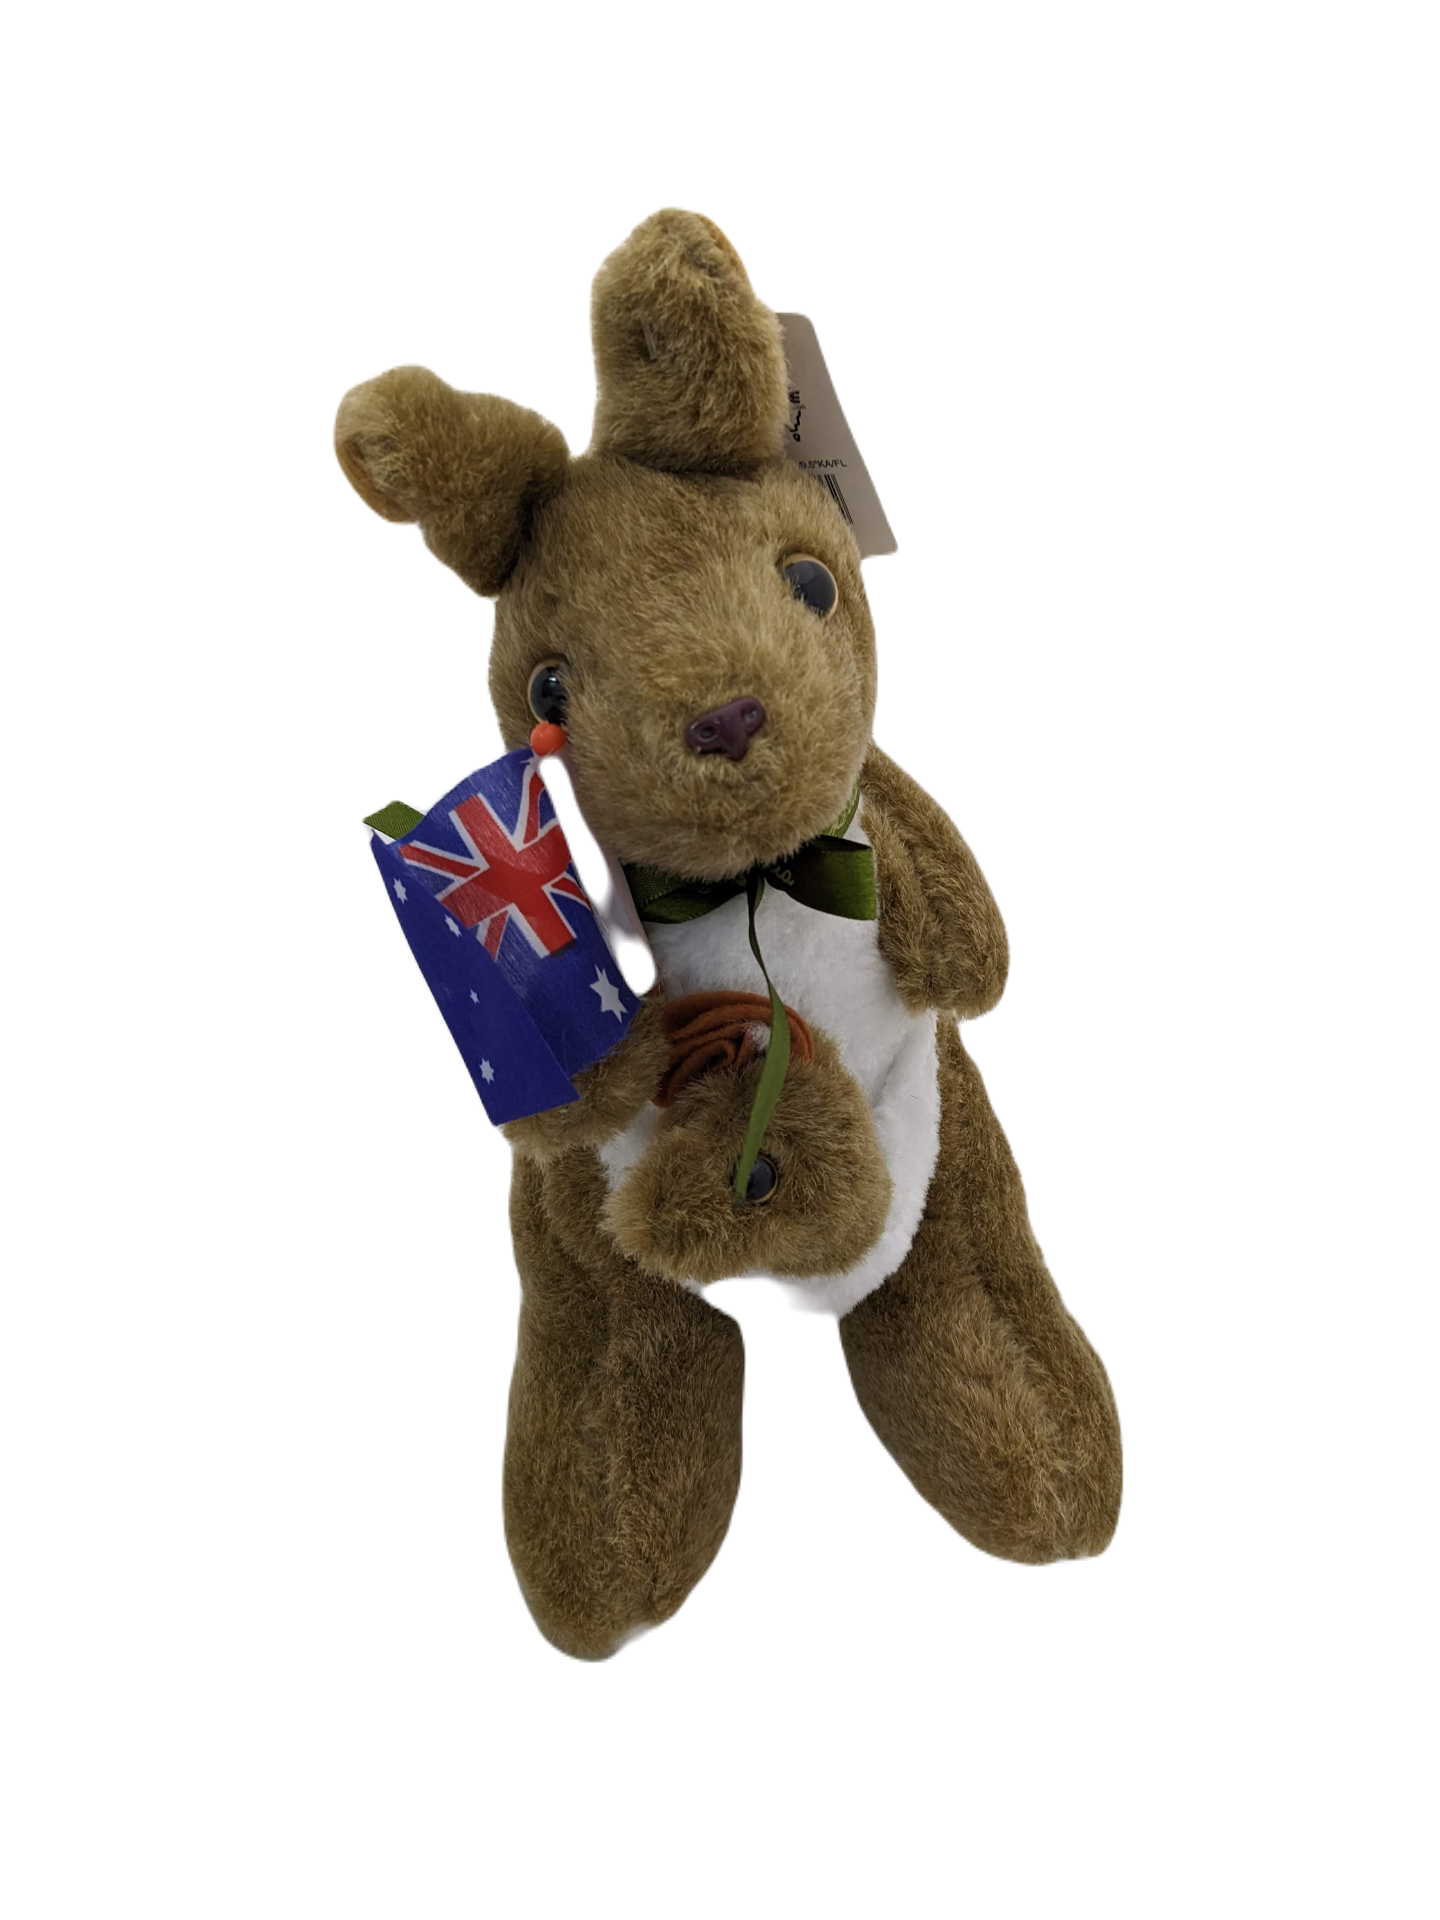 Kangaroo with Joey and Flag - Soft Toy 9.5 inches